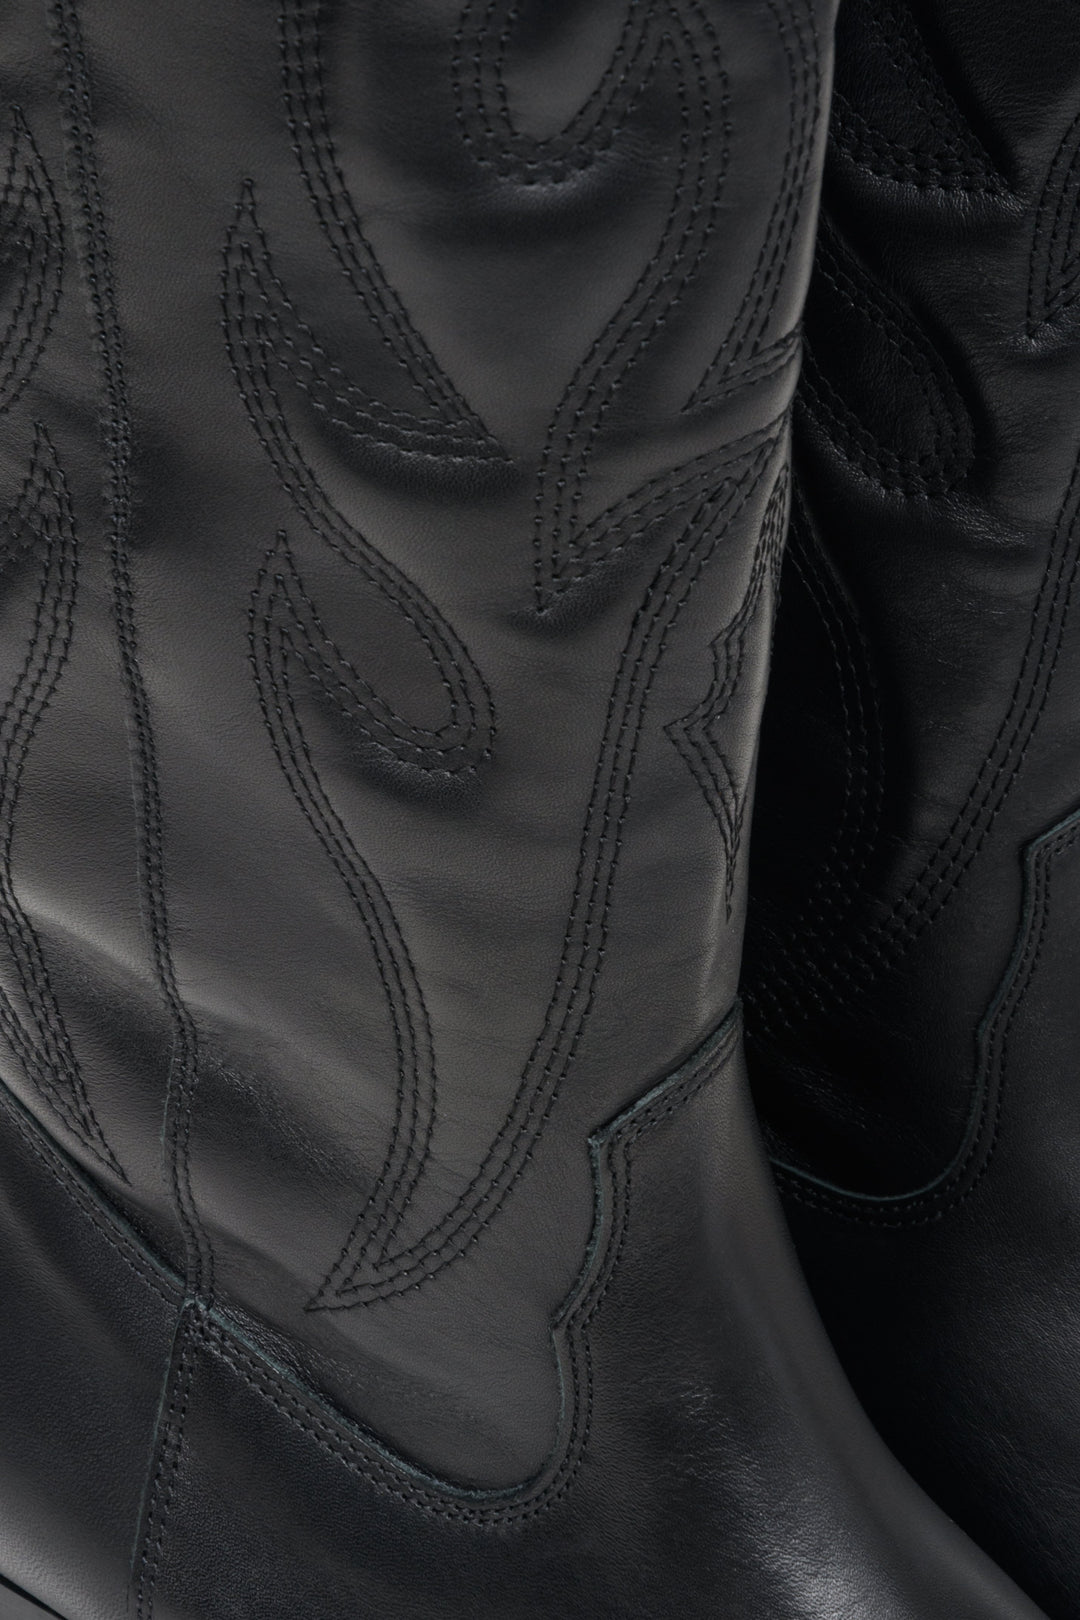 Women's black cowboy boots with embellishments made of genuine Italian leather - close-up on the details.